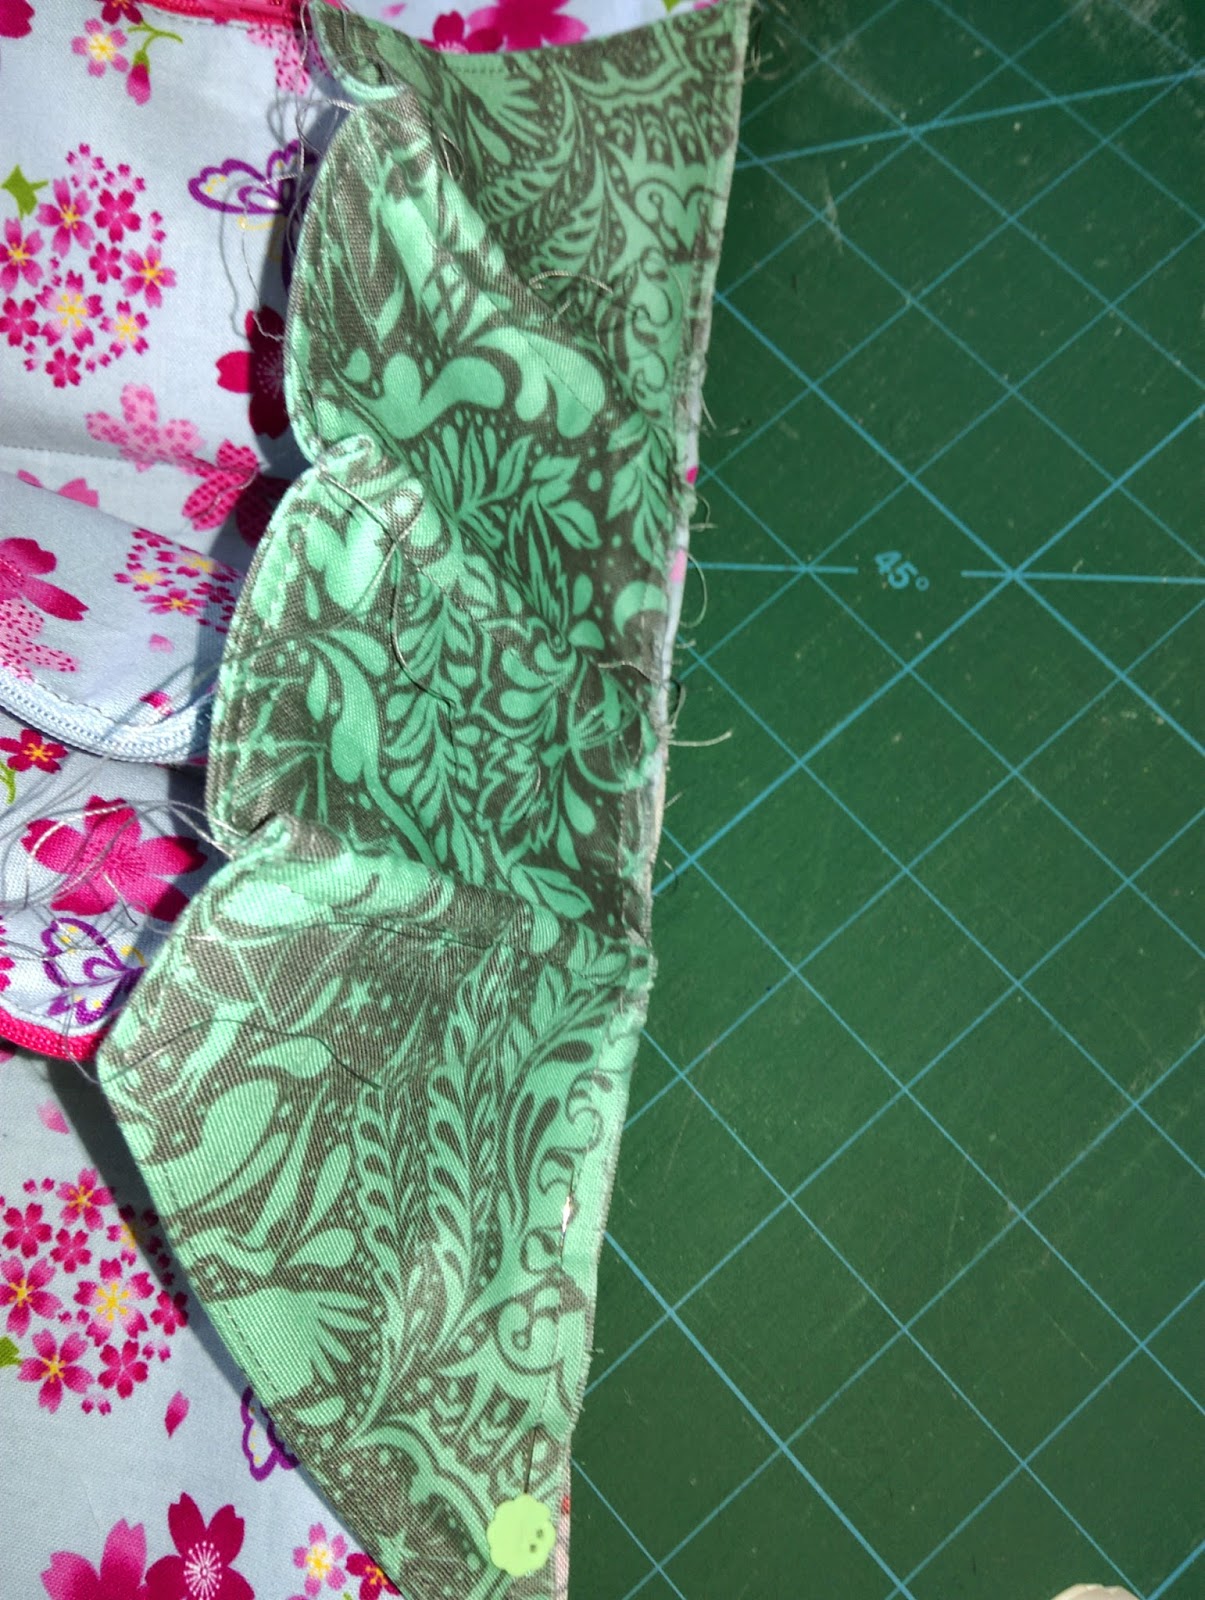 The Running Hare: My first Sew Together Bag